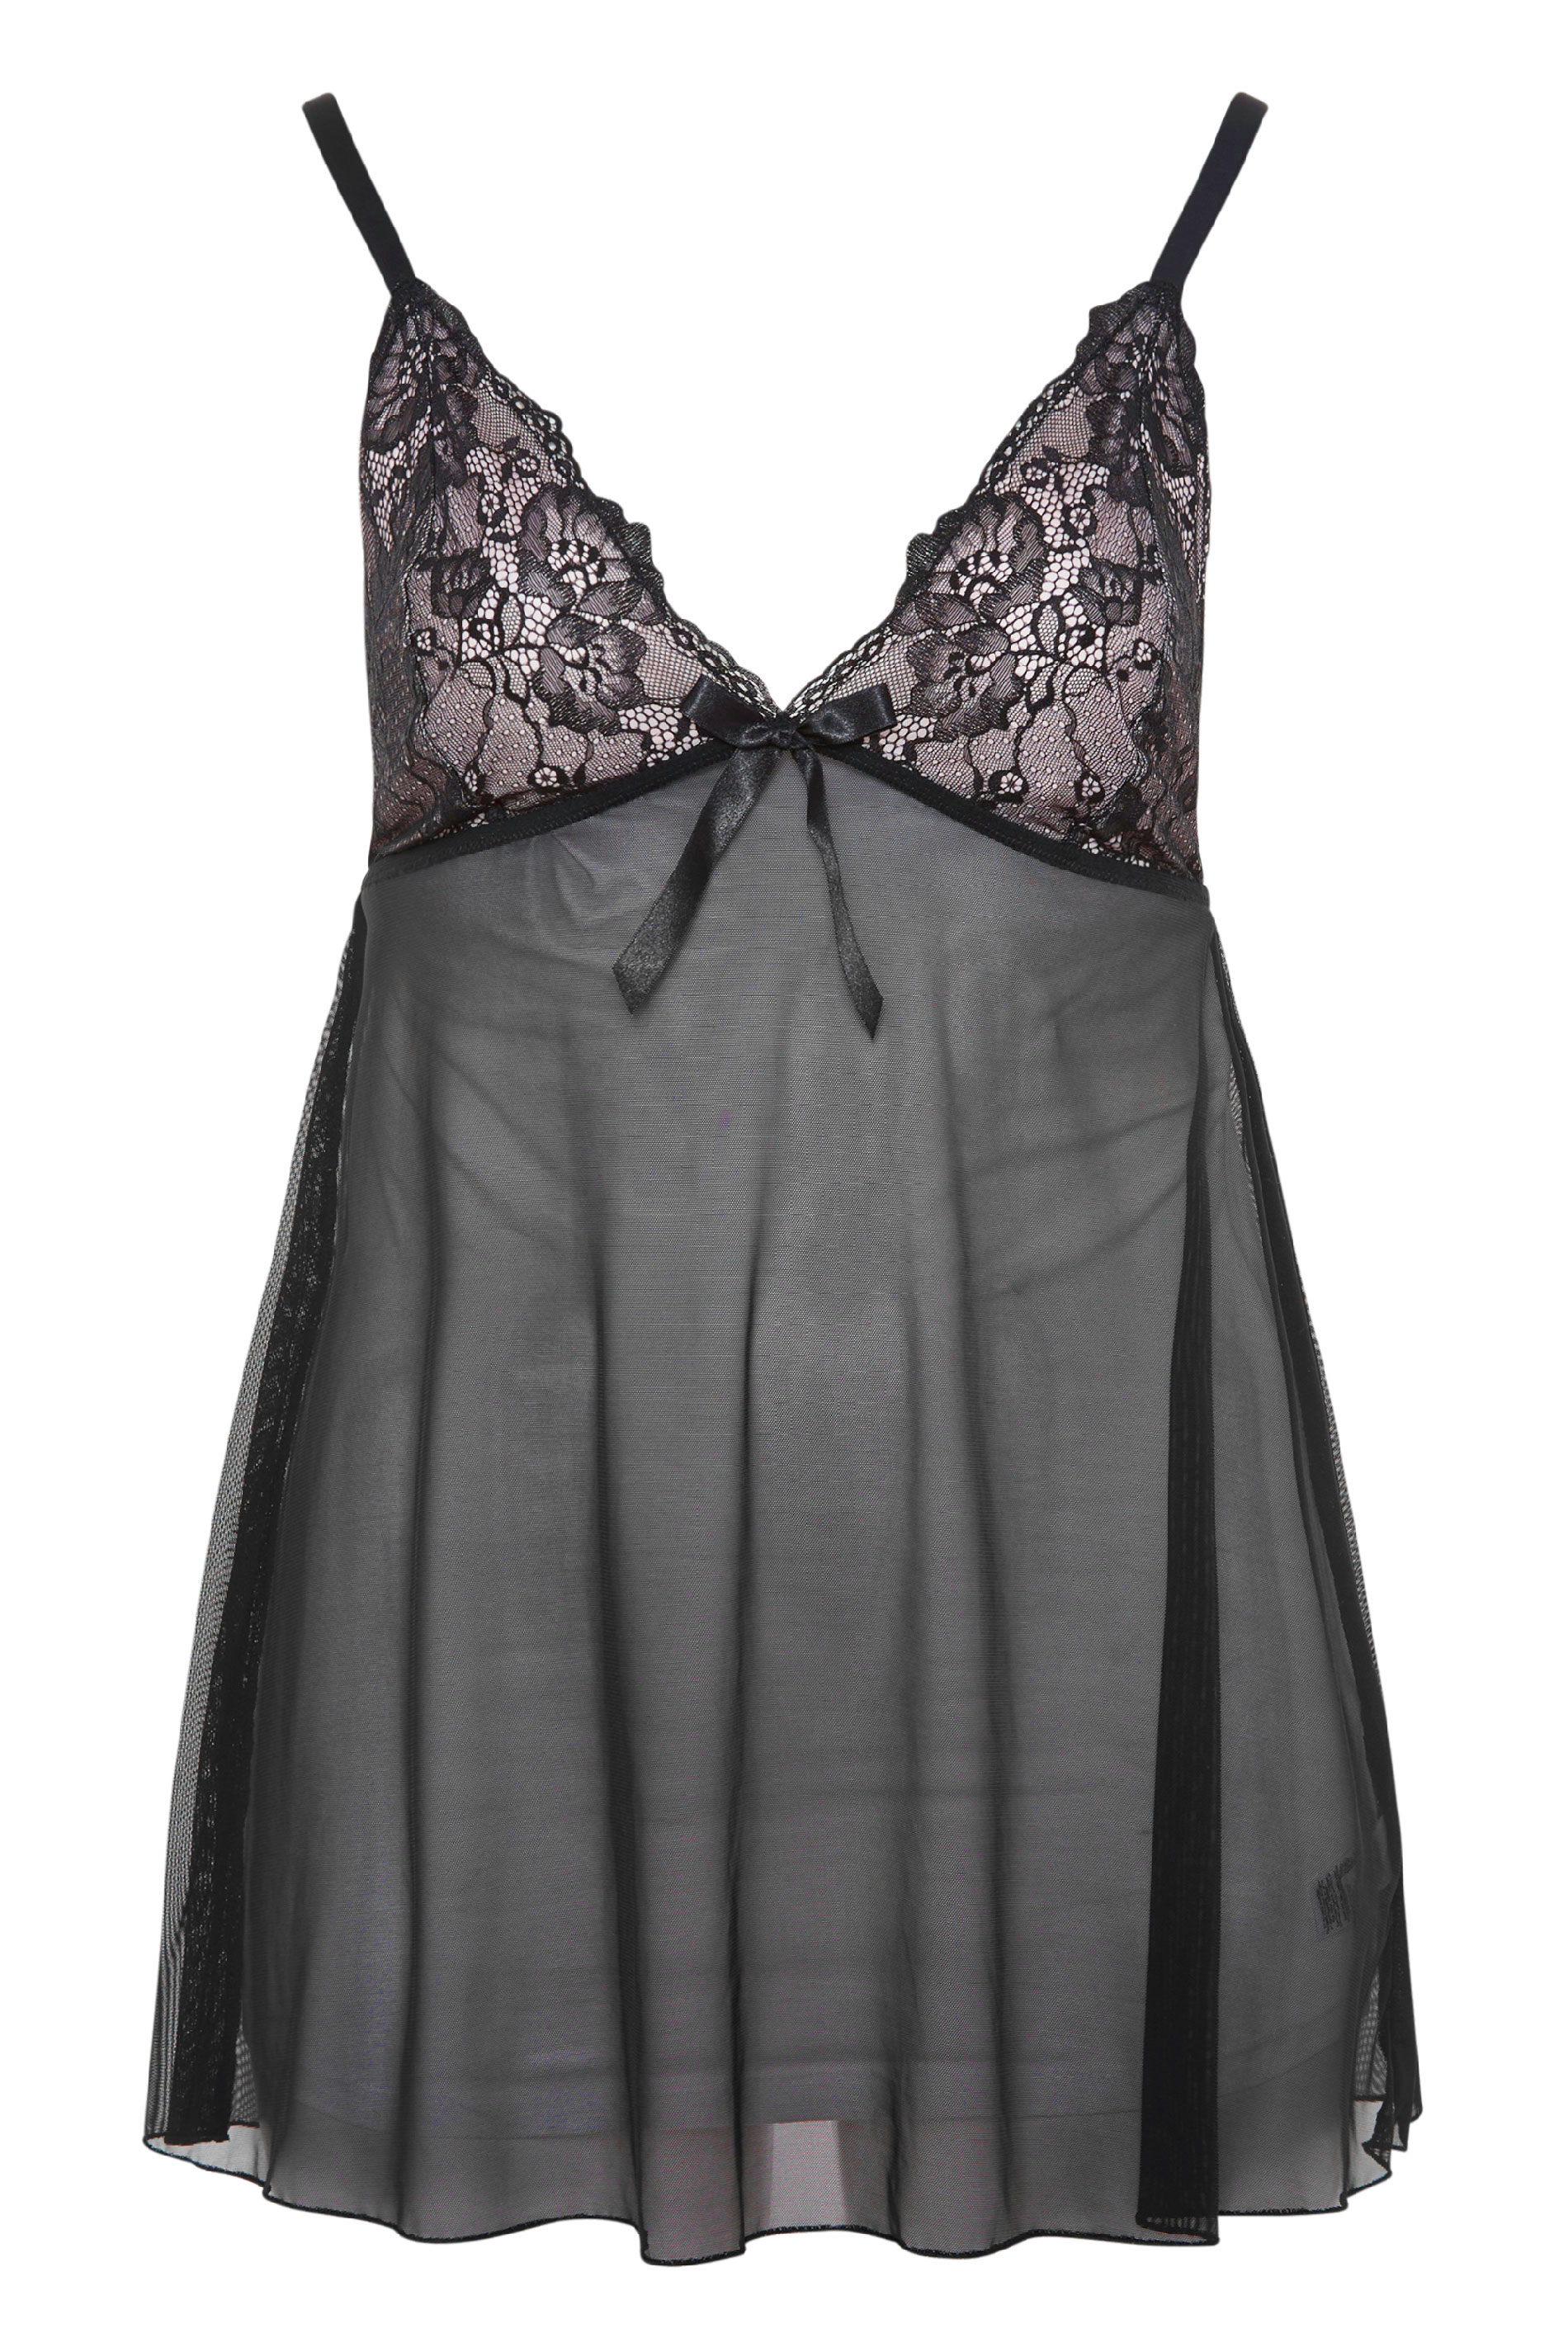 Plus Size Black Boudior Mesh Lace Contrast Babydoll | Yours Clothing